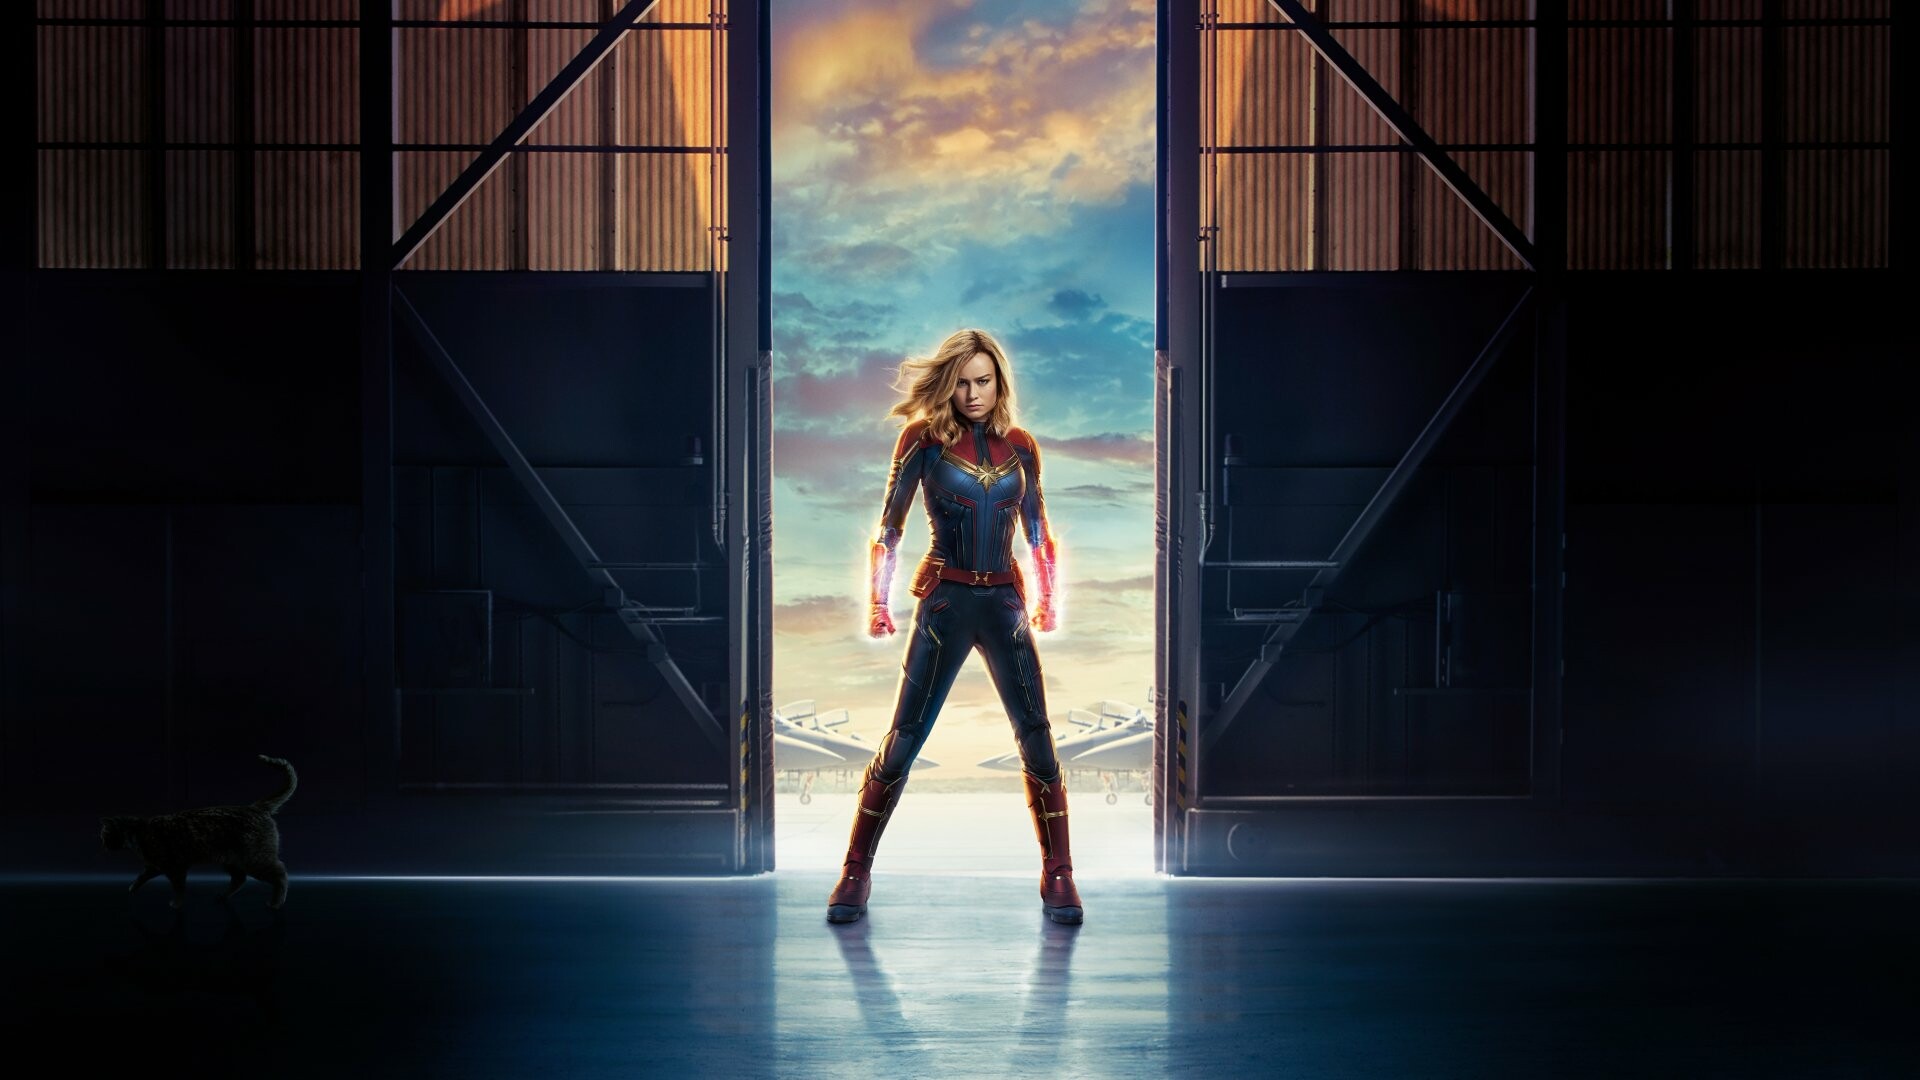 Marvel: Carol Danvers, a former U.S. Air Force fighter pilot who was given superhuman abilities. 1920x1080 Full HD Background.